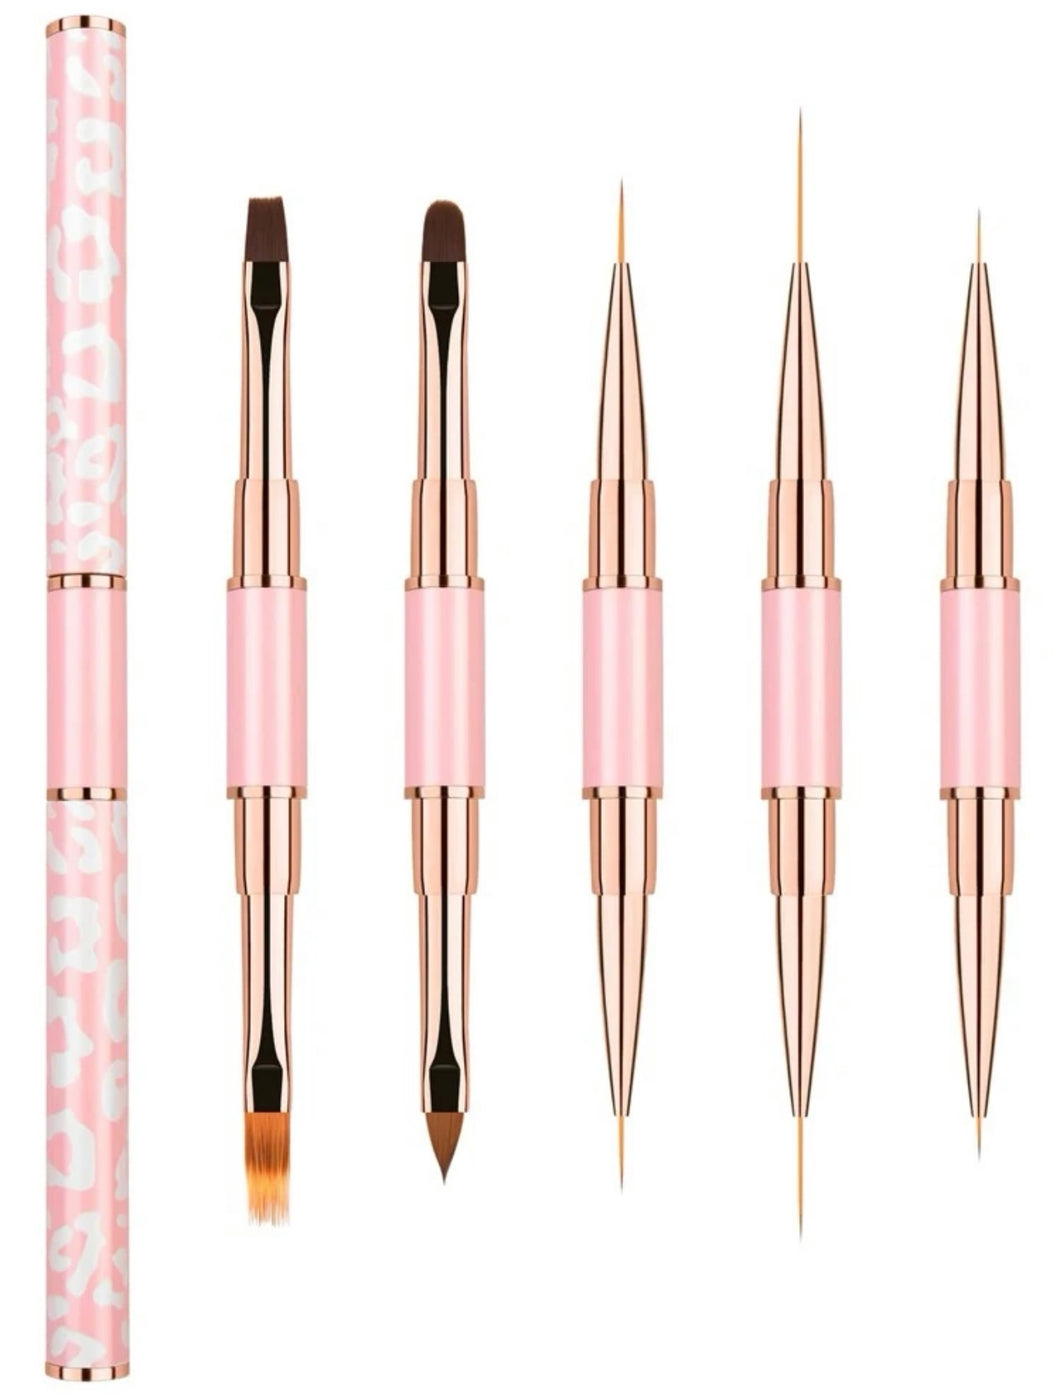 The Only Set of Brushes You Need